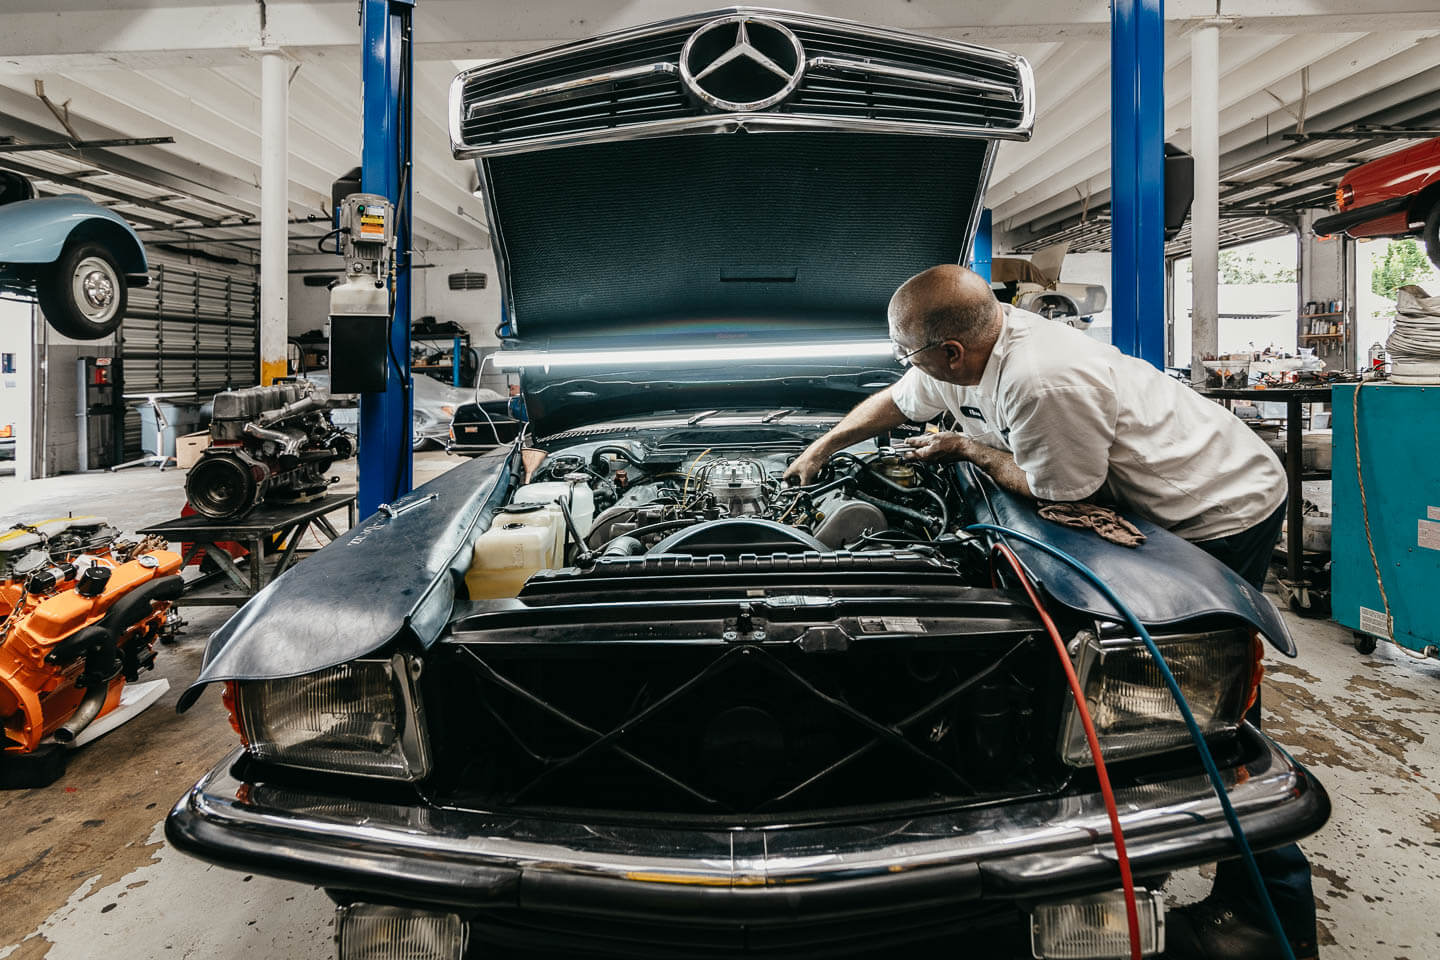 Expert technician meticulously servicing the engine of a classic Mercedes-Benz at Miami Benz workshop.